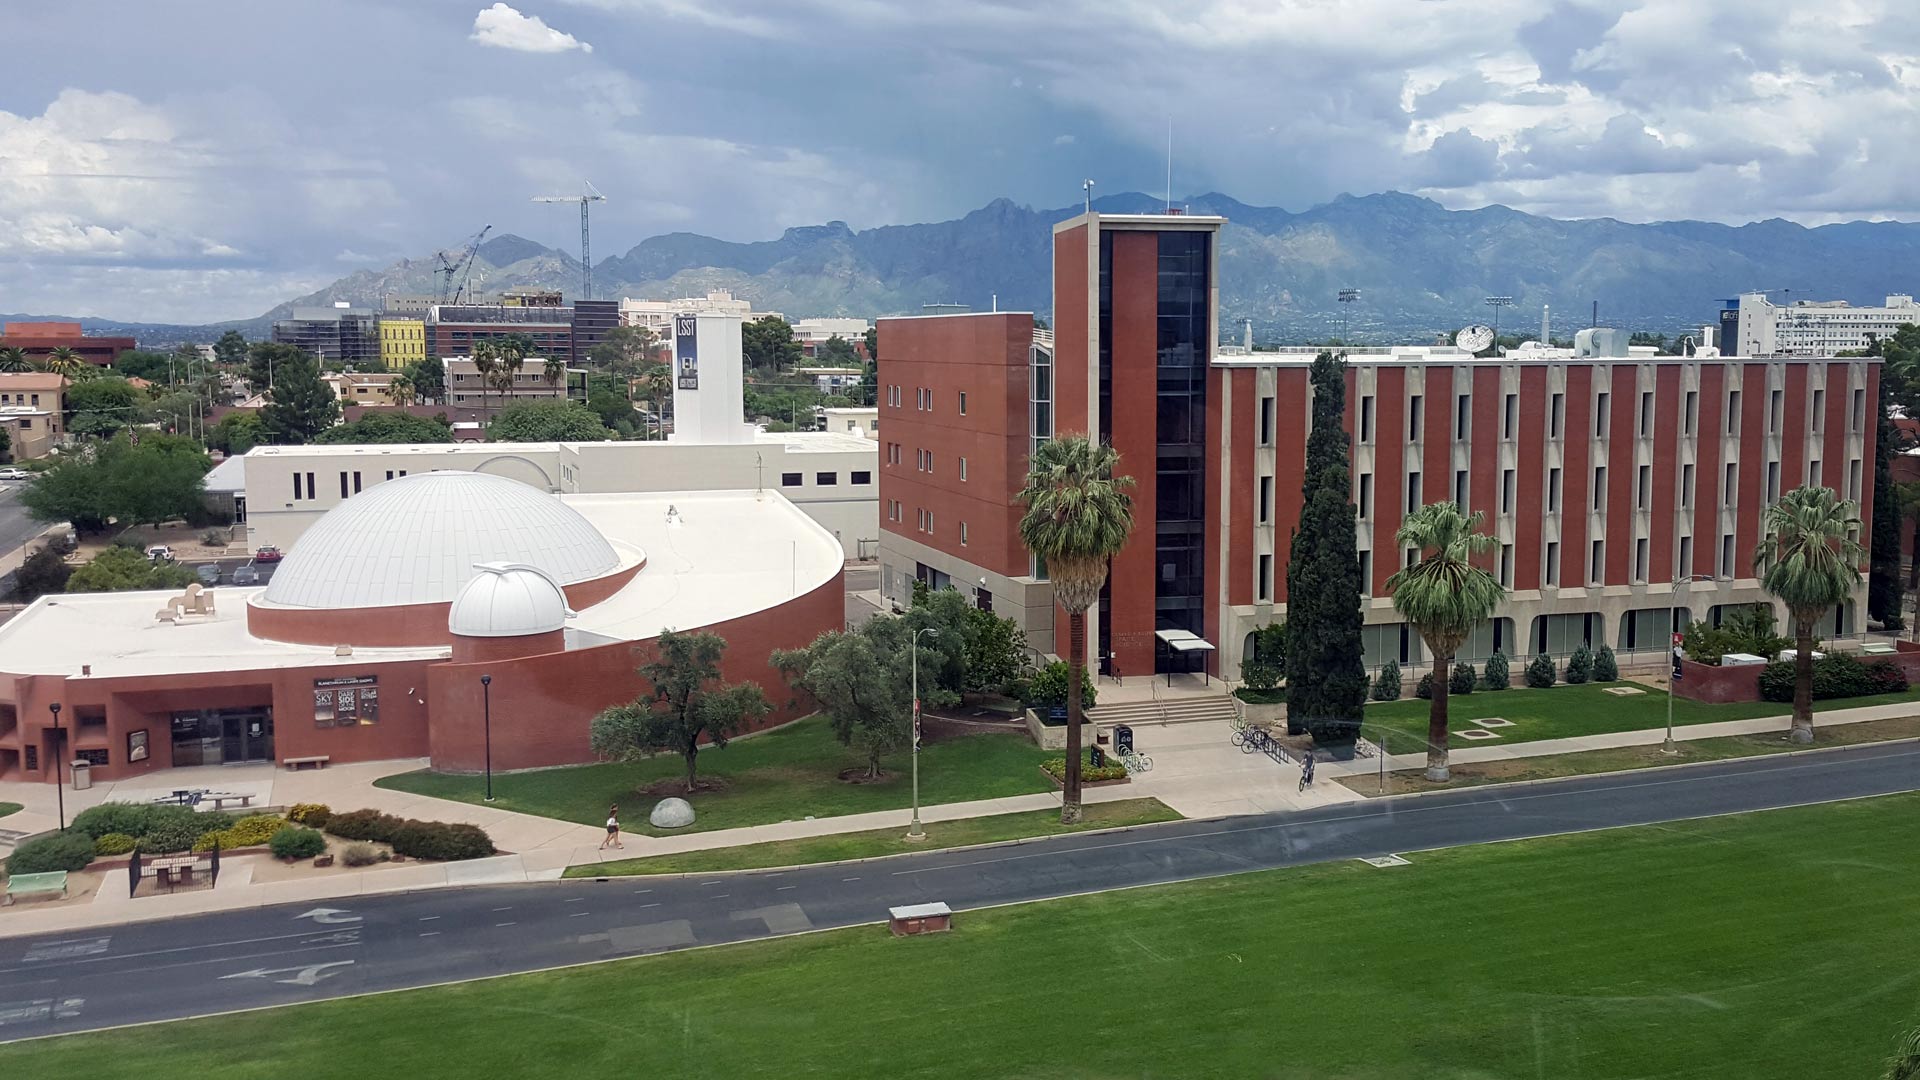 The Flandrau Science Center and Planetarium (left) and the Kuiper Space Sciences Building (right) on the University of Arizona campus.